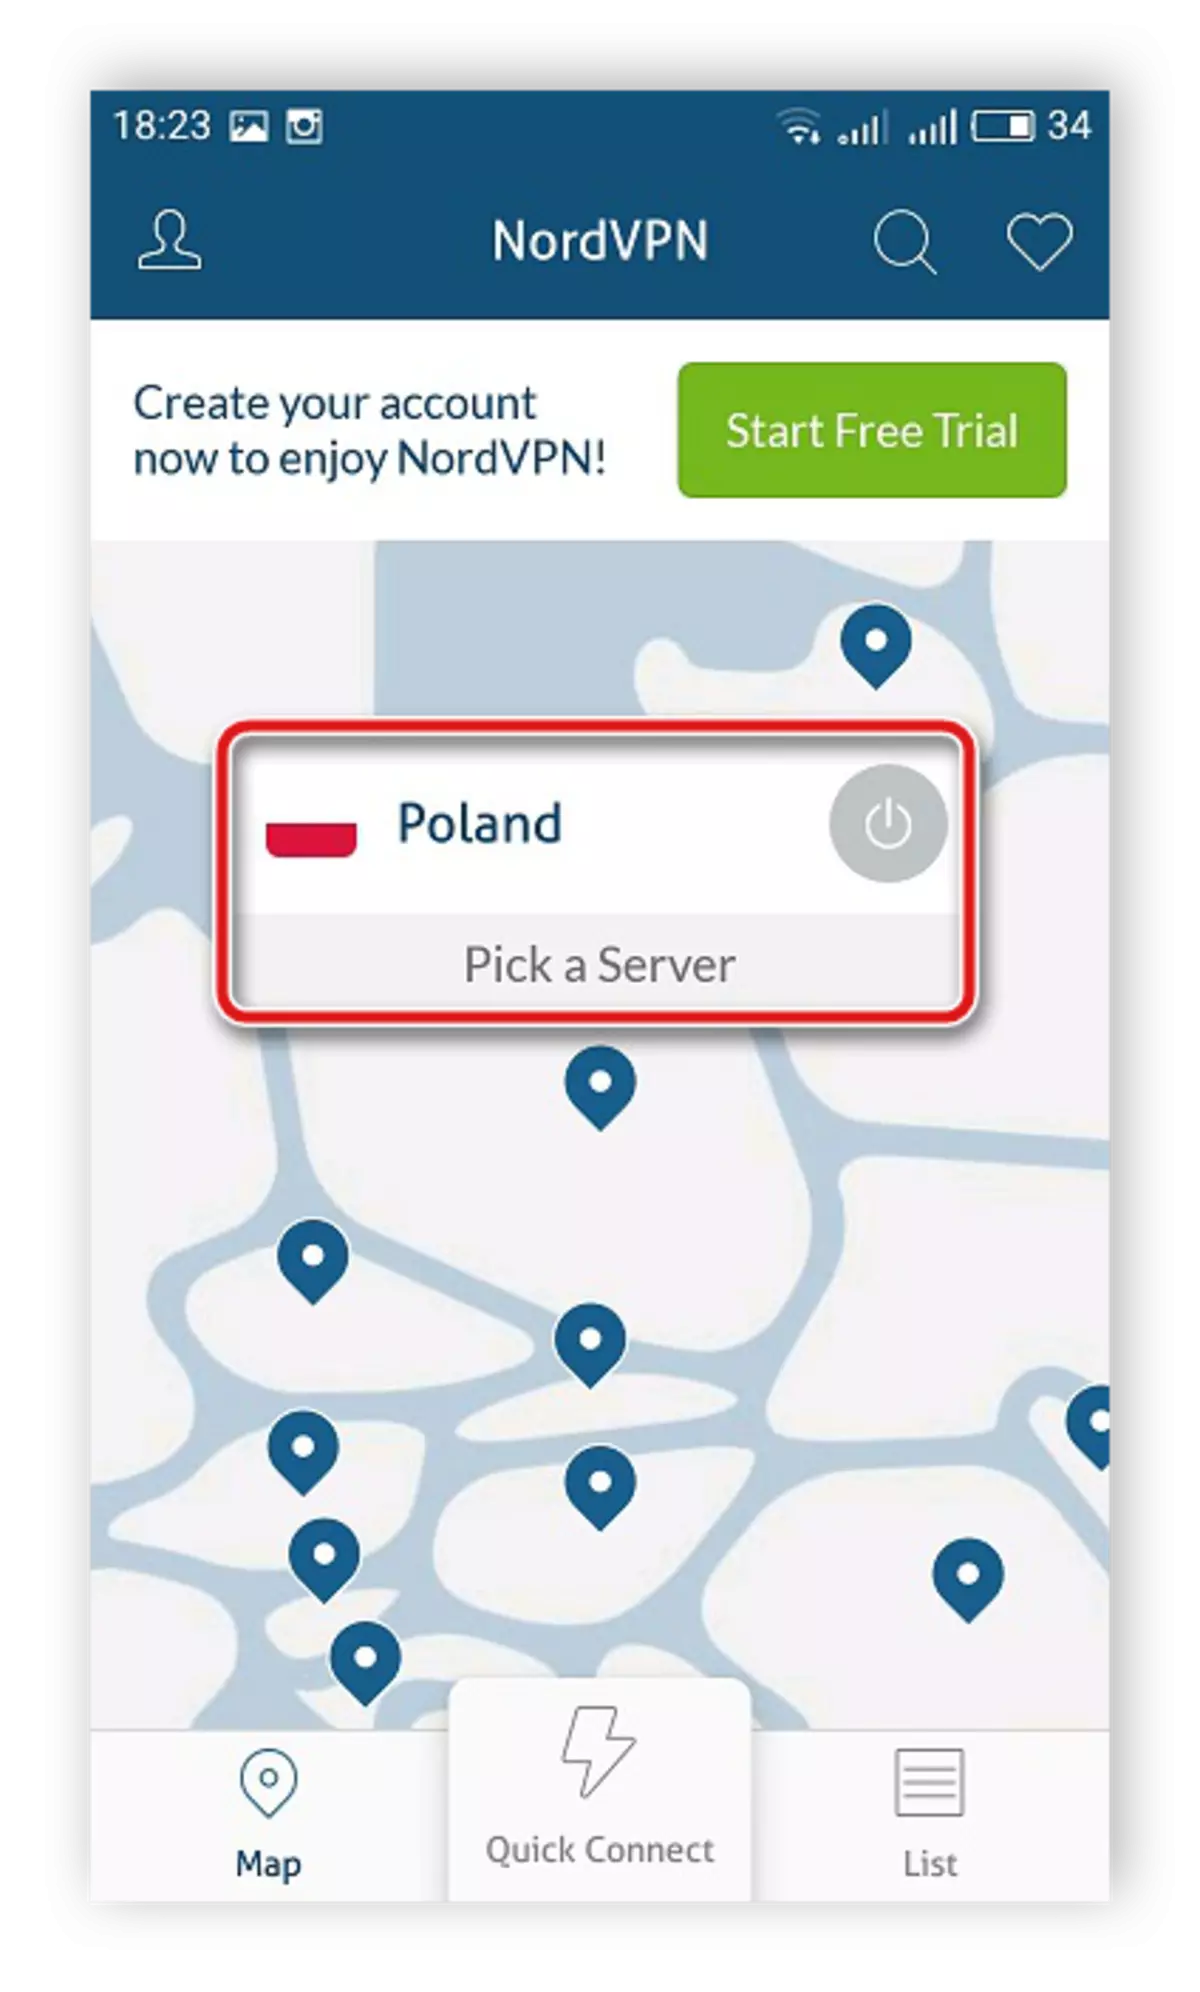 Choice of the country for connecting to NORDVPN